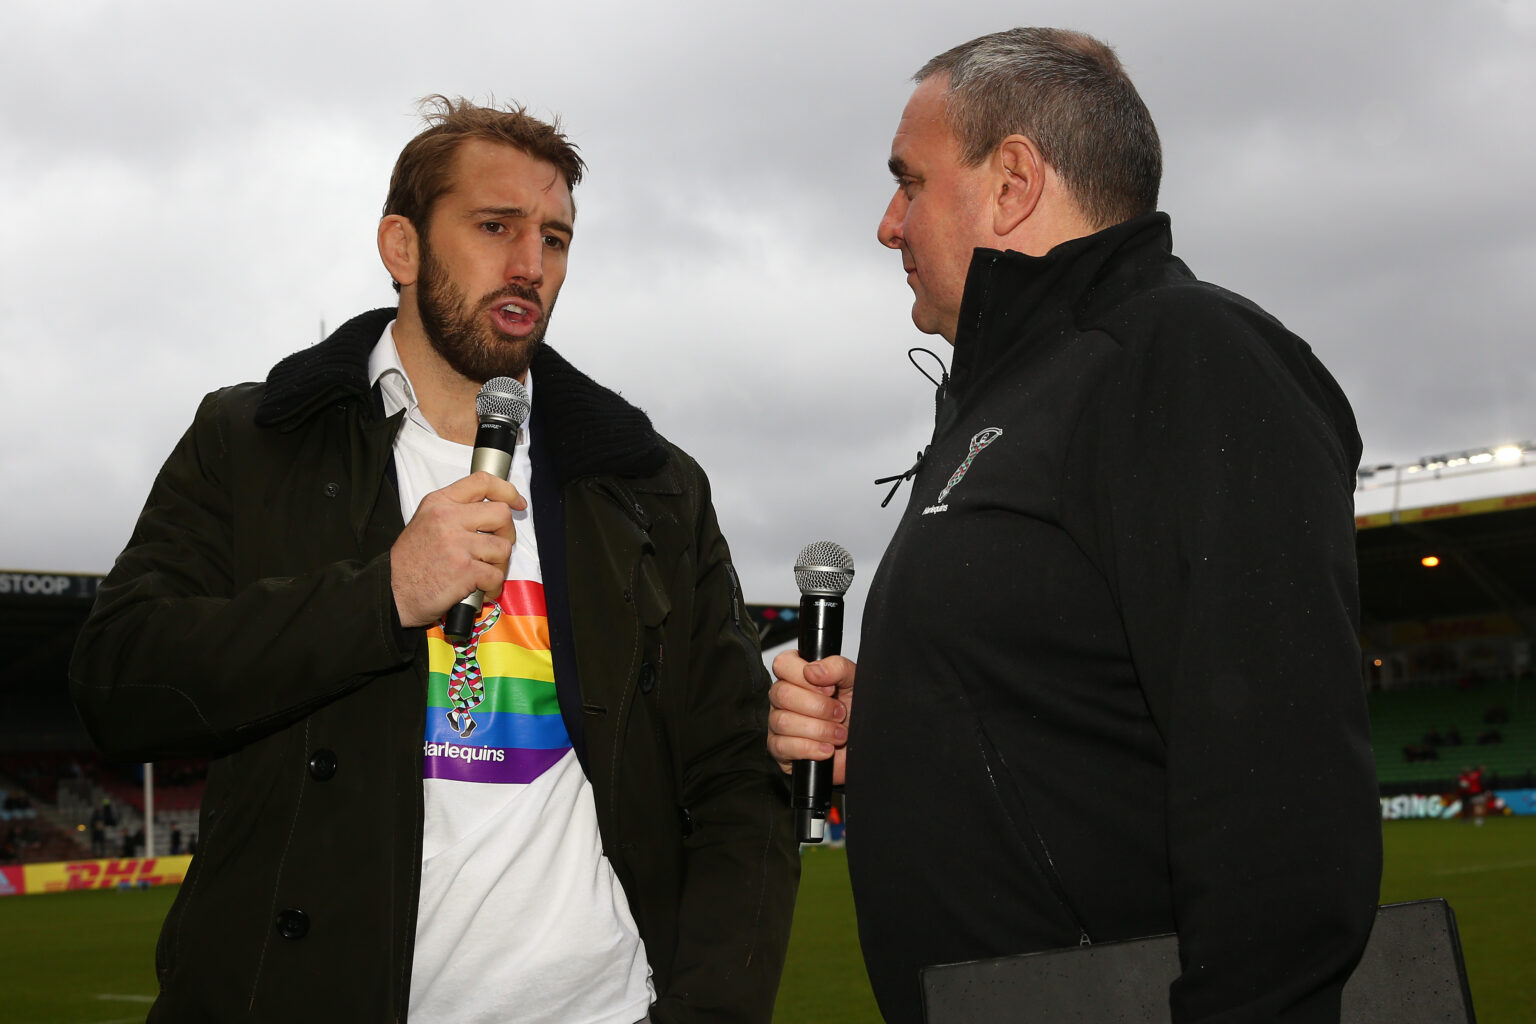 LONDON, ENGLAND - FEBRUARY 15: Chris Robshaw wearing a rainbow T shirt prior to the Gallagher Premiership Rugby match between Harlequins and London Irish at  on February 15, 2020 in London, England. (Photo by Steve Bardens/Getty Images for Harlequins)